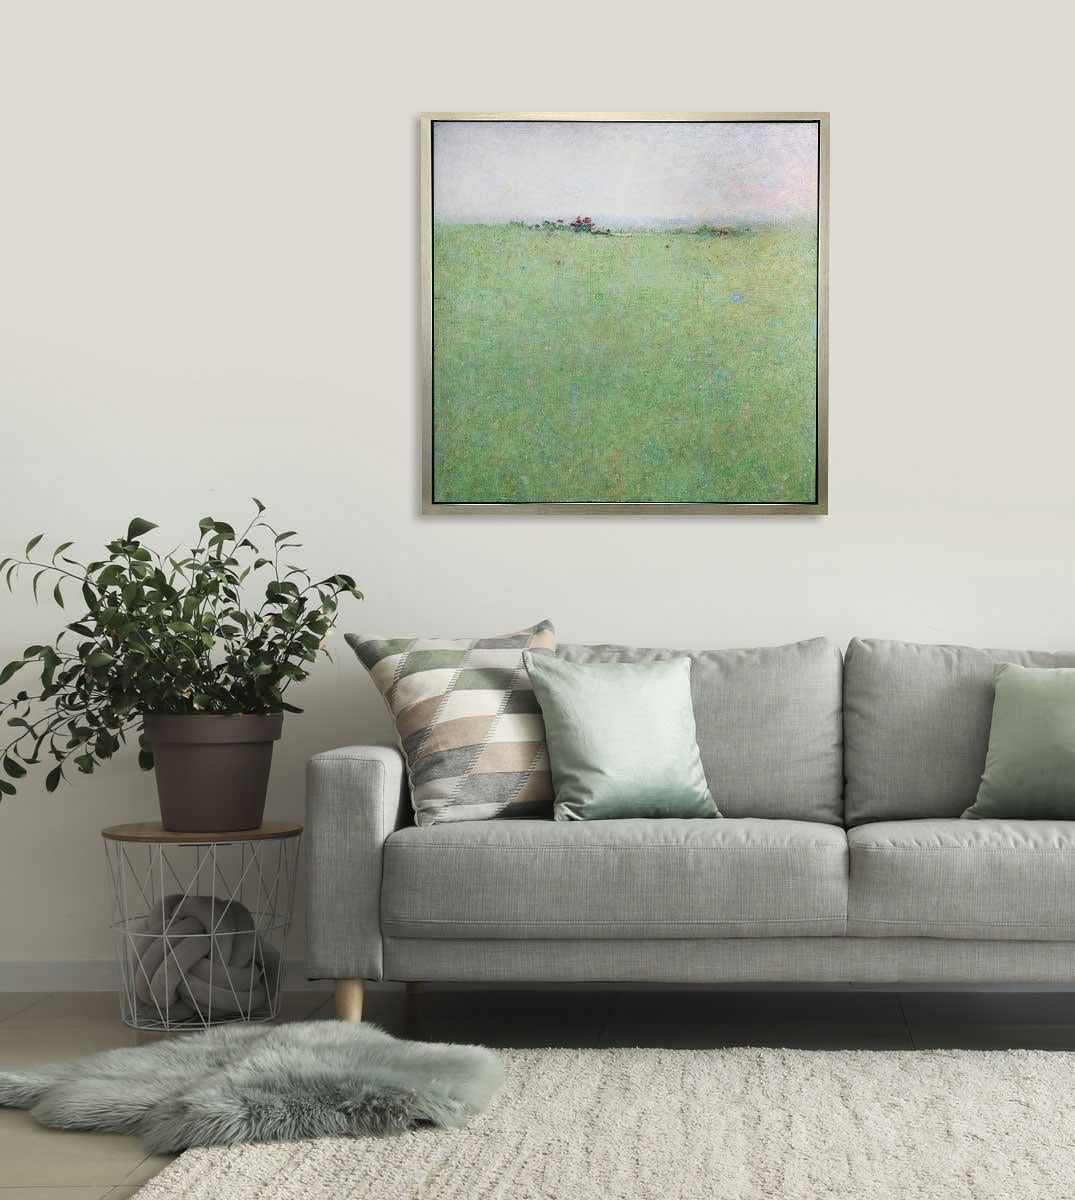 This limited edition print is an abstract landscape by Elwood Howell. It features a high, blurred horizon line, with green beneath it and light grey above it. The green area is spattered with small specs of bright color like blue and pink. A cluster